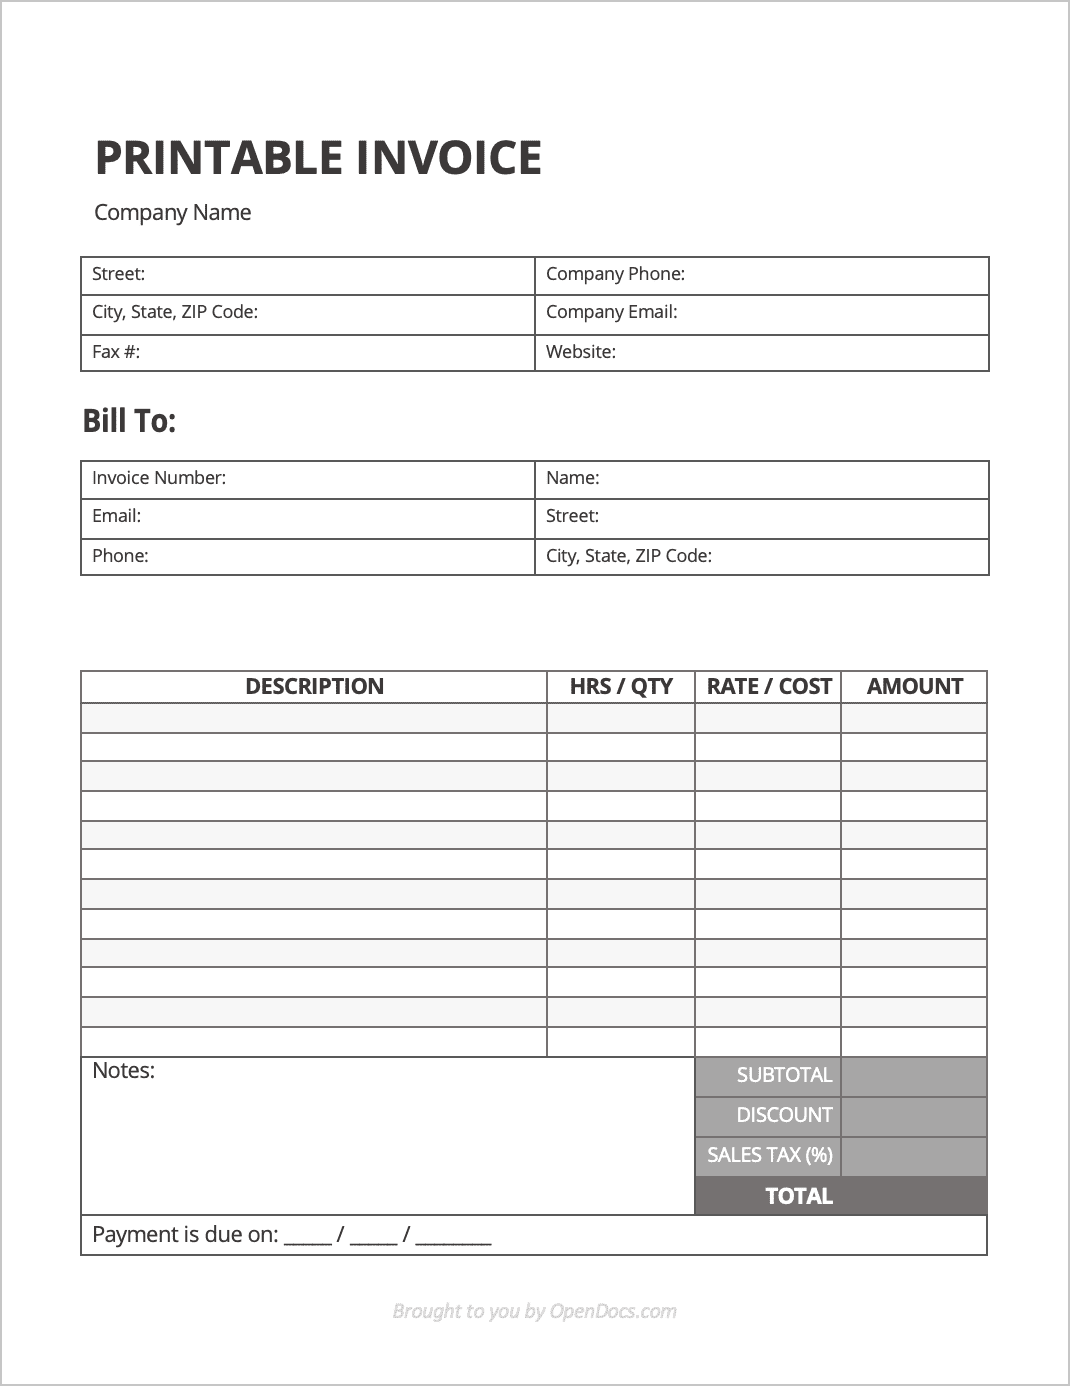 Free Printable Invoice Templates Indesign